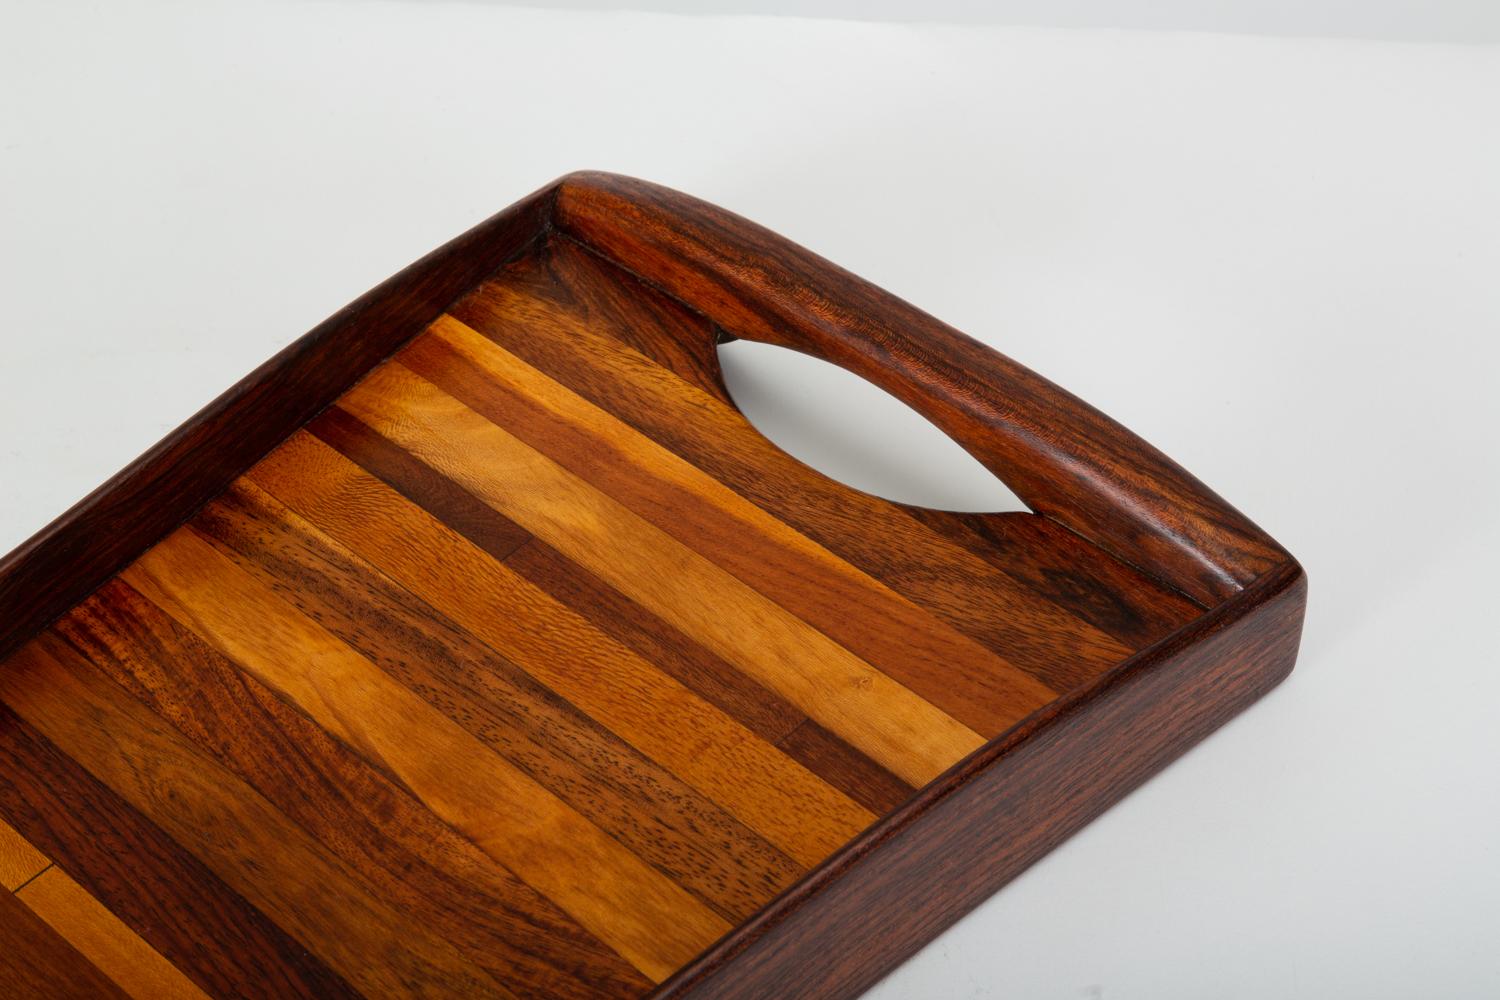 Narrow Striped Tray by Don Shoemaker for Señal (Cocobolo)